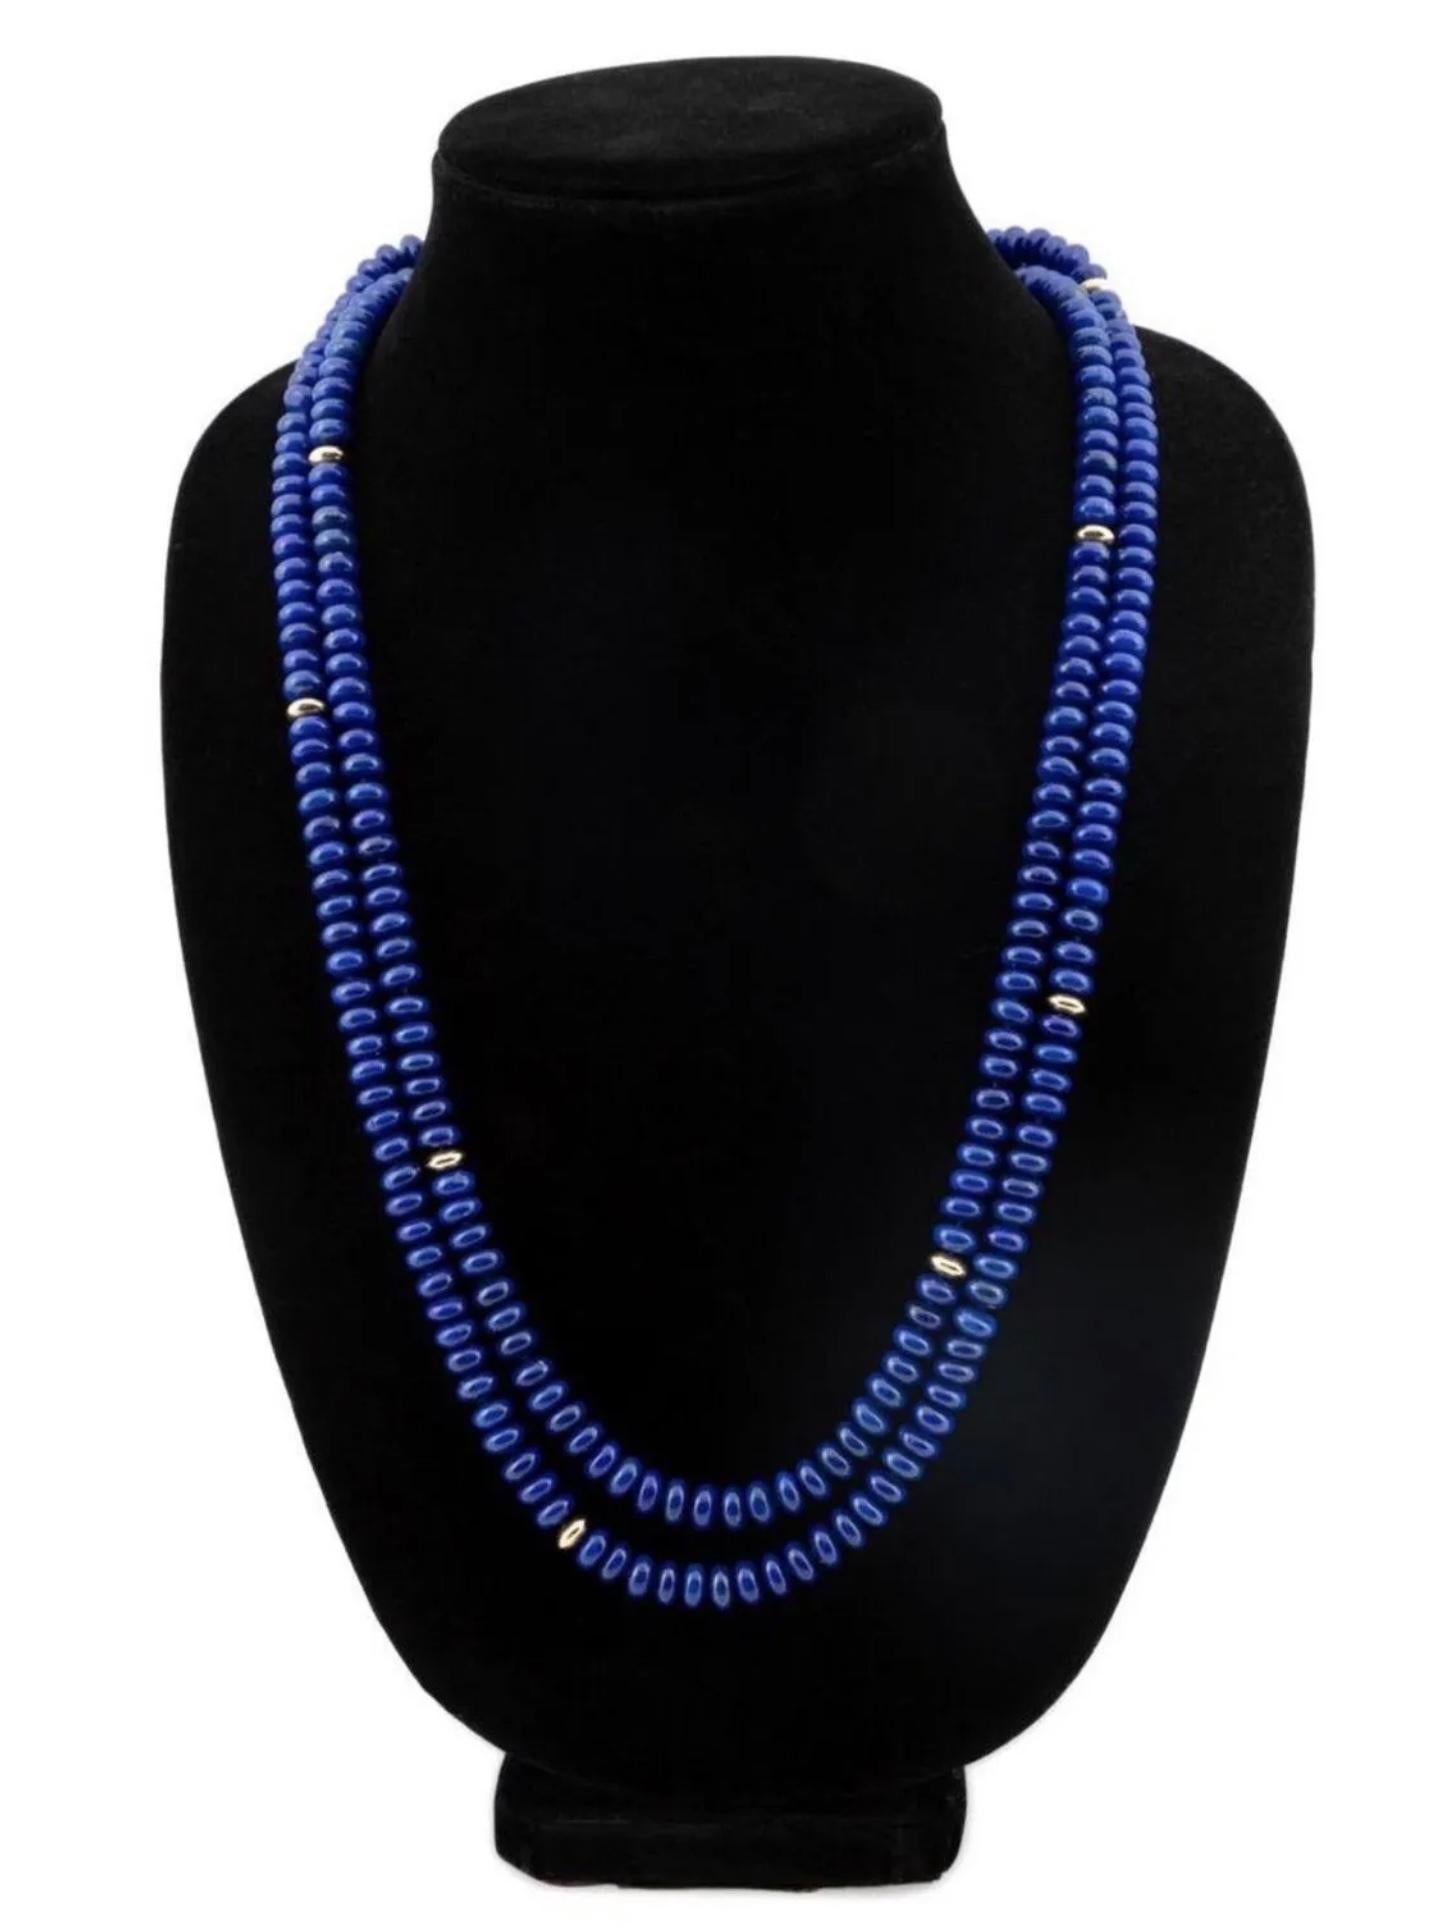 Valentin Magro Lapis Lazuli 18k Gold Rondelle Bead Double Strand Necklace In Good Condition For Sale In Perry, FL